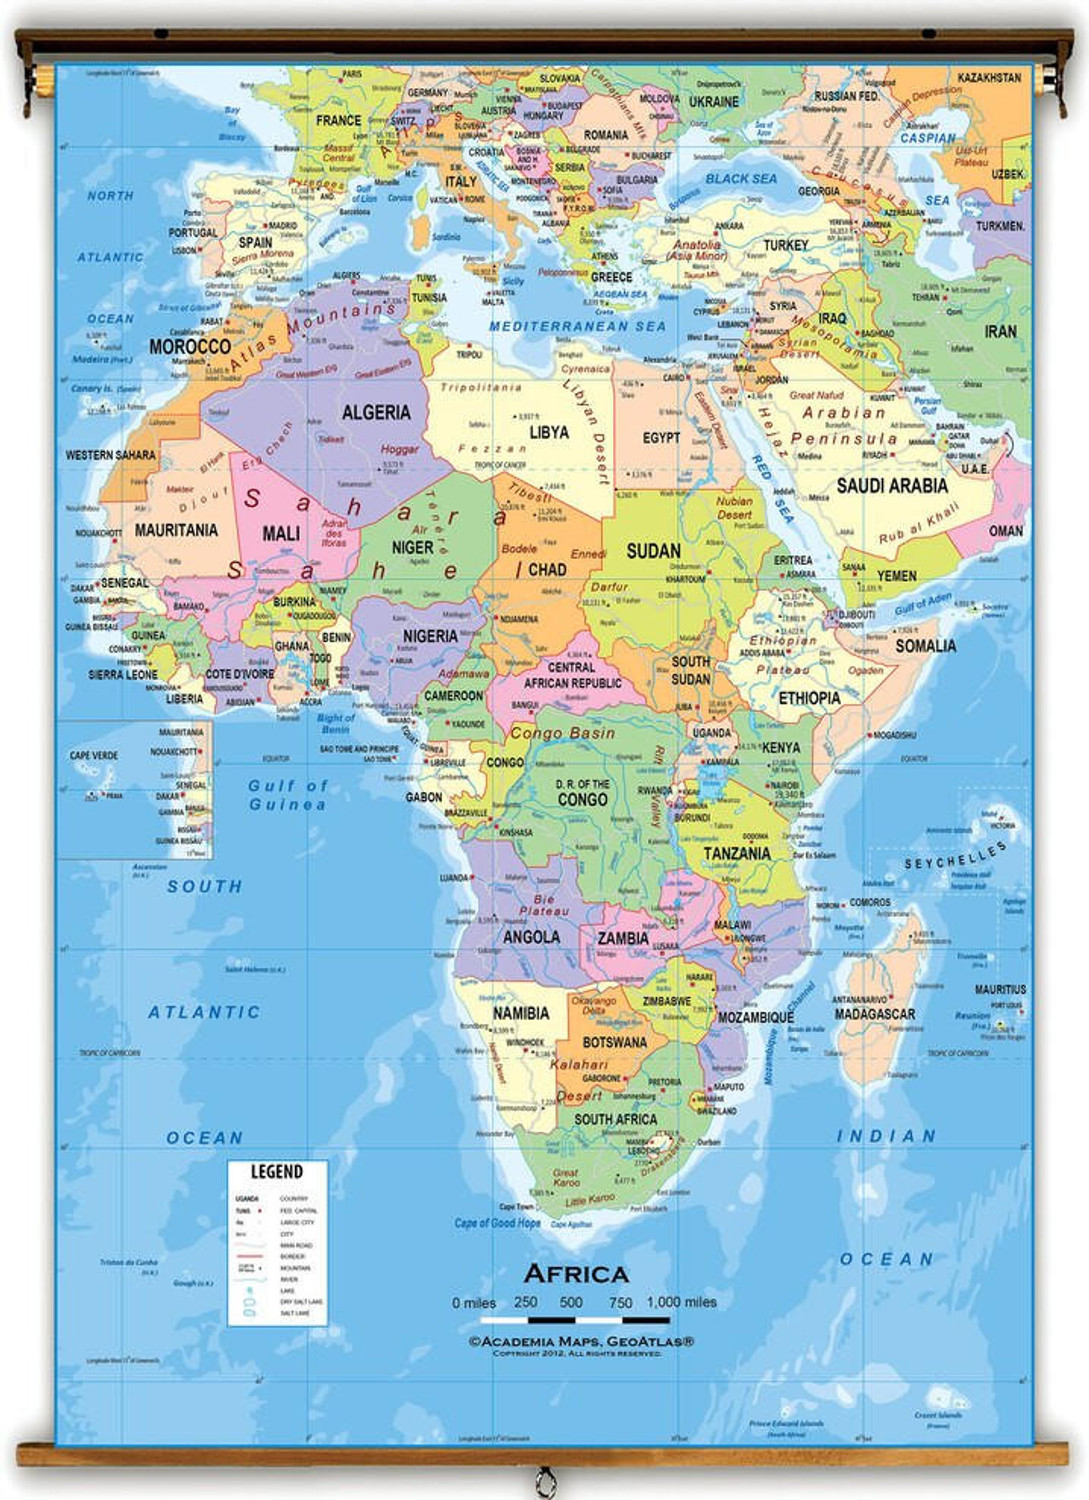 Individual Country Maps of Africa, image 1, World Maps Online